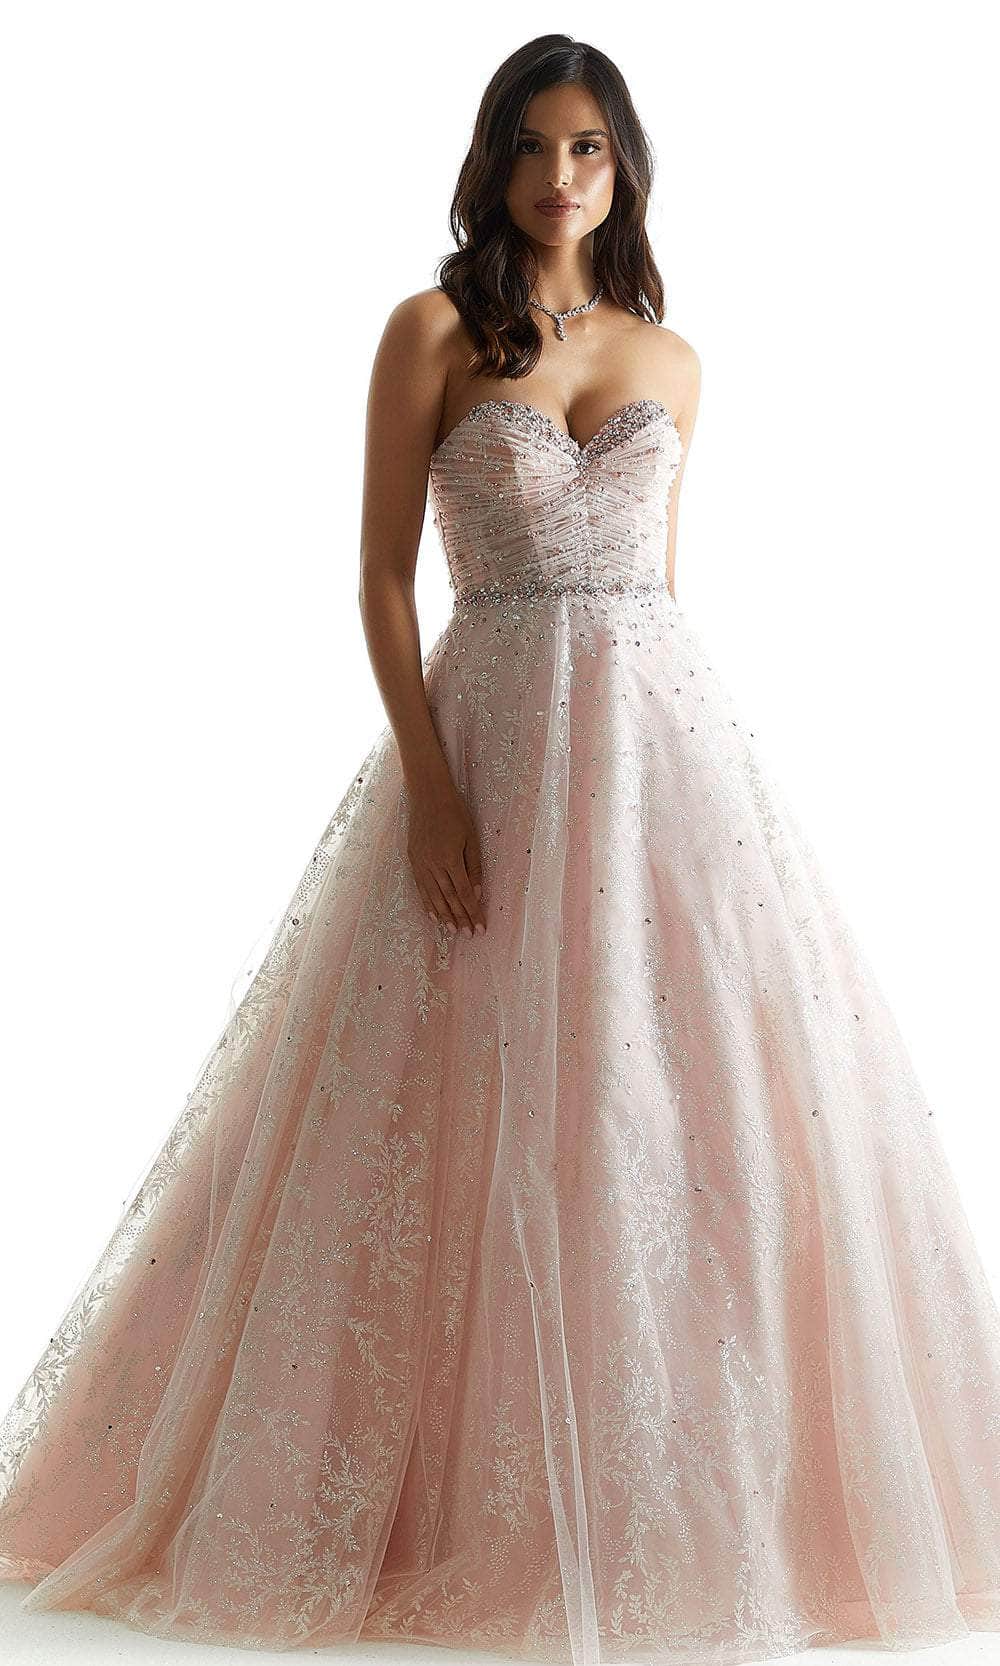 Image of Mori Lee 49066 - Ruched Sweetheart Prom Dress